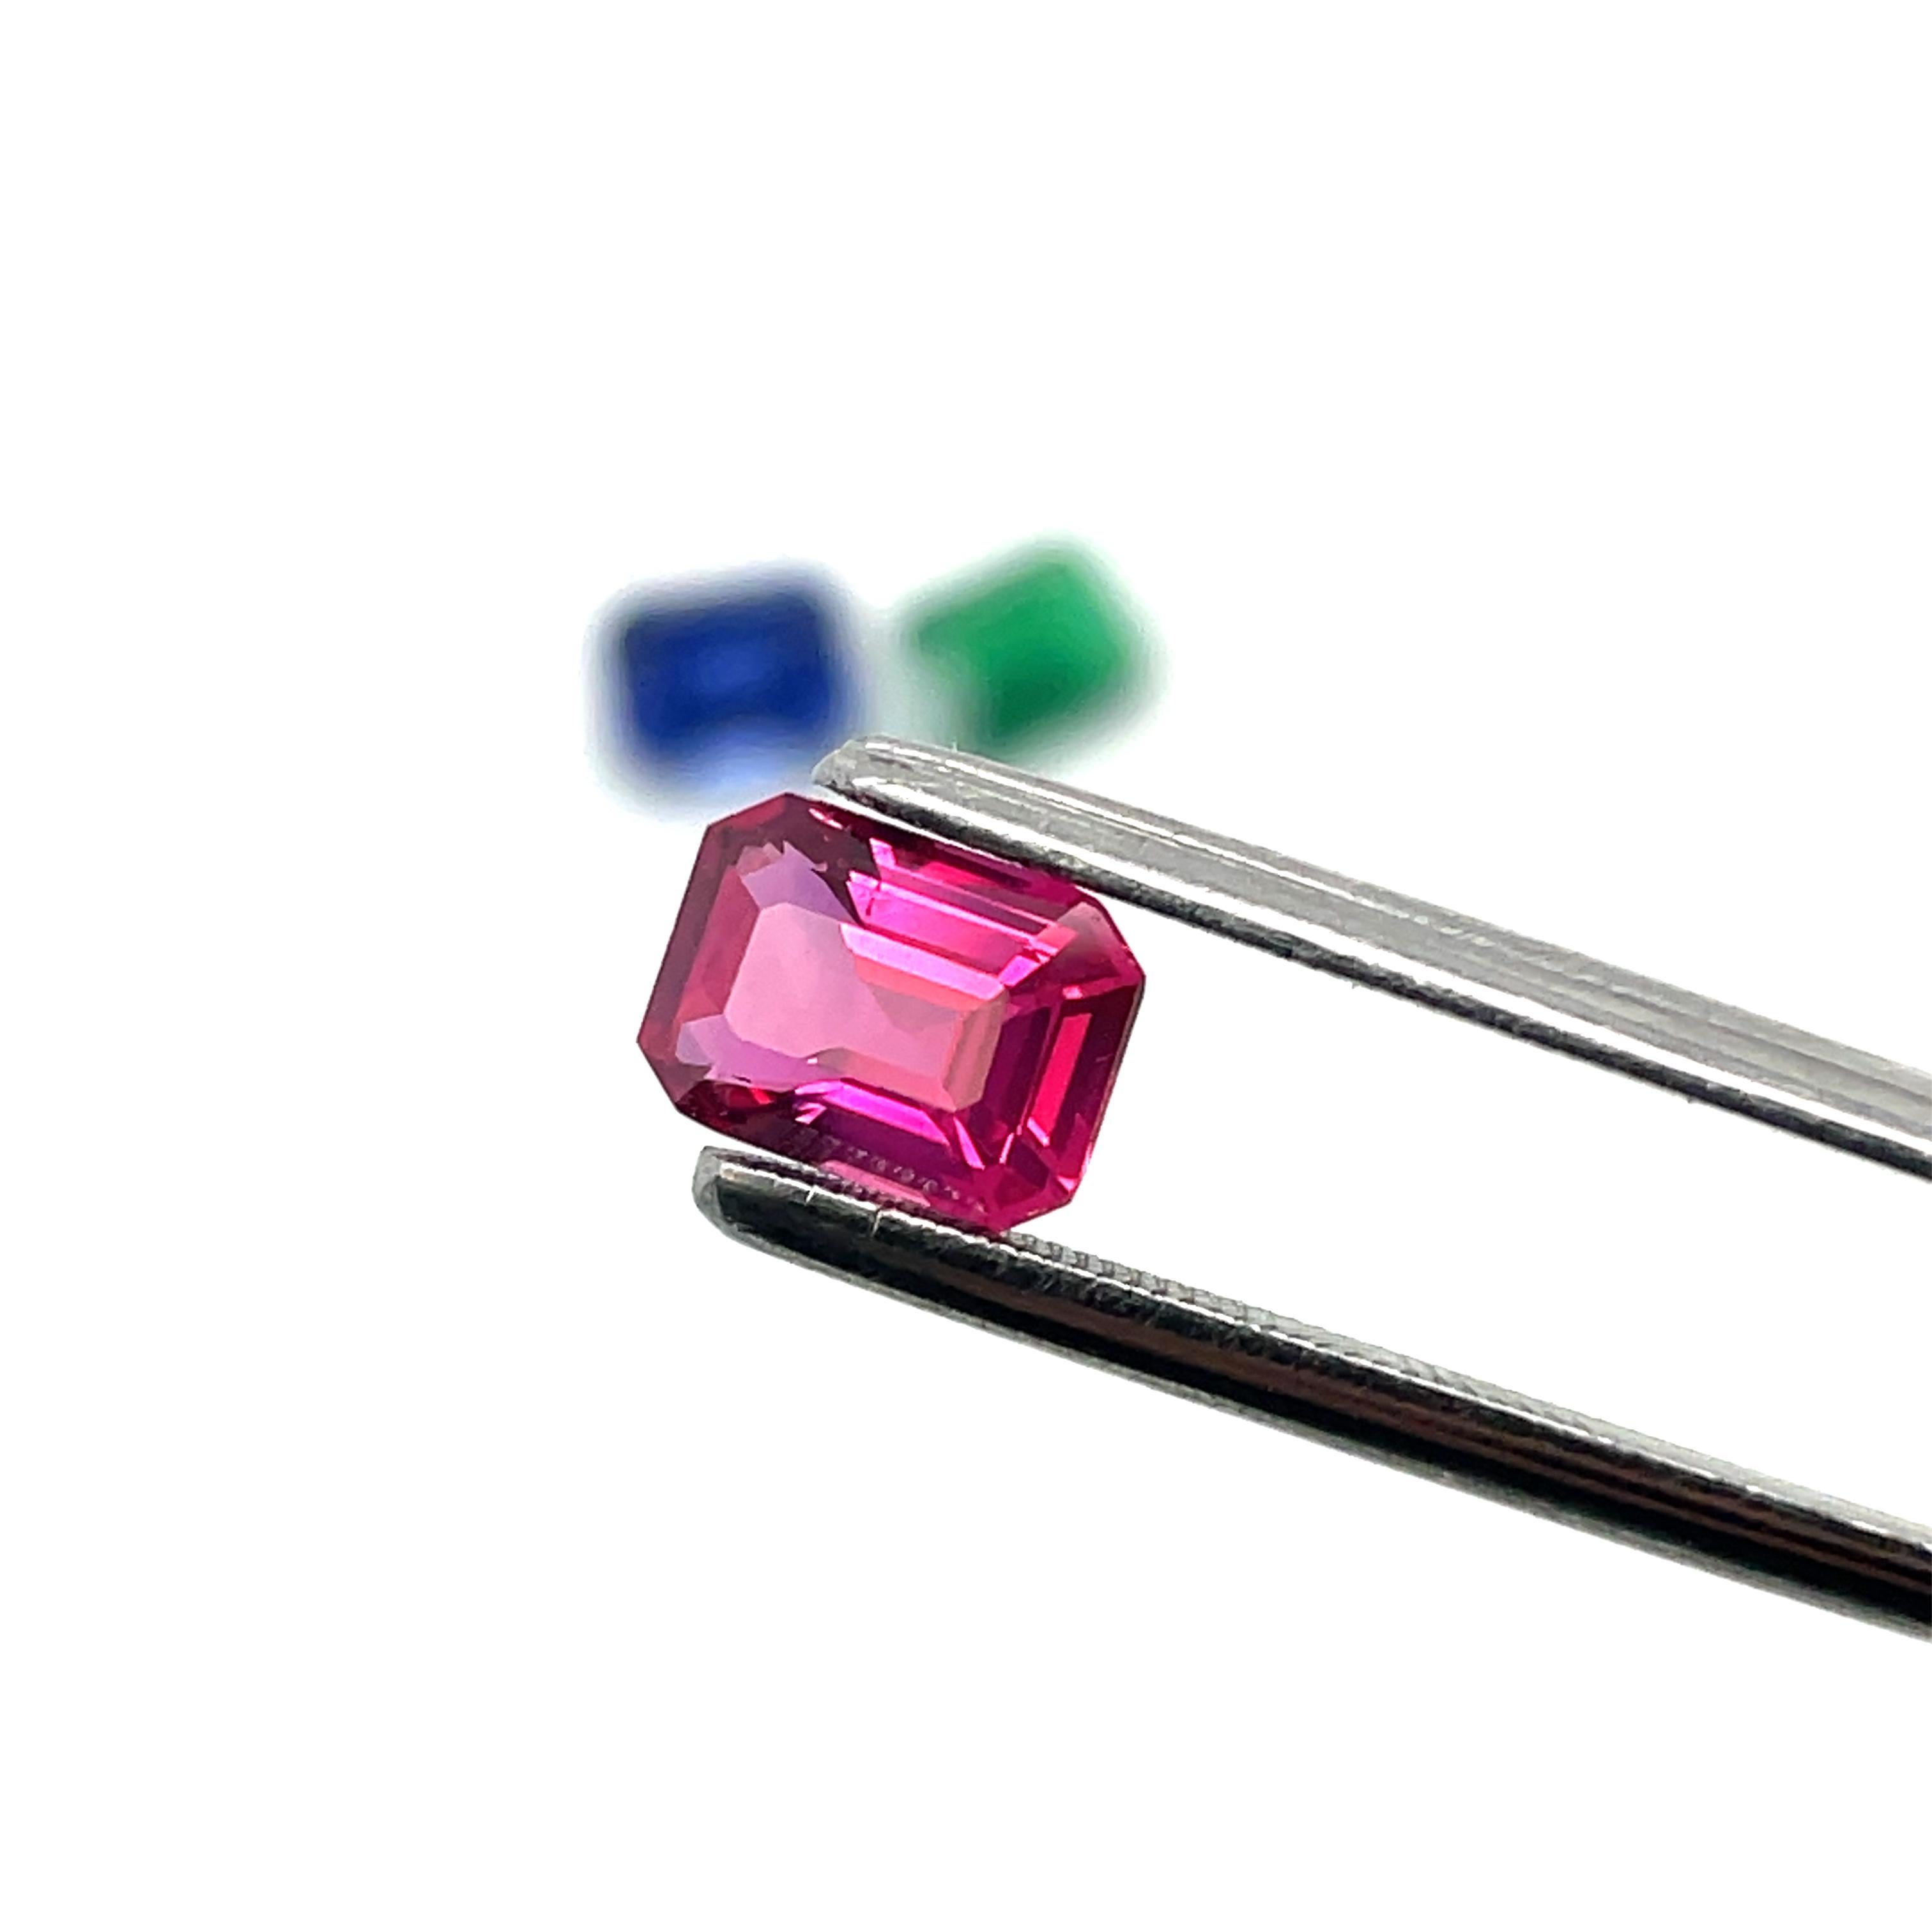 Emerald-Cut Ruby Cts 1.31 and Blue Sapphire Cts 2.16 and Emerald Cts 0.92 Loose  For Sale 6